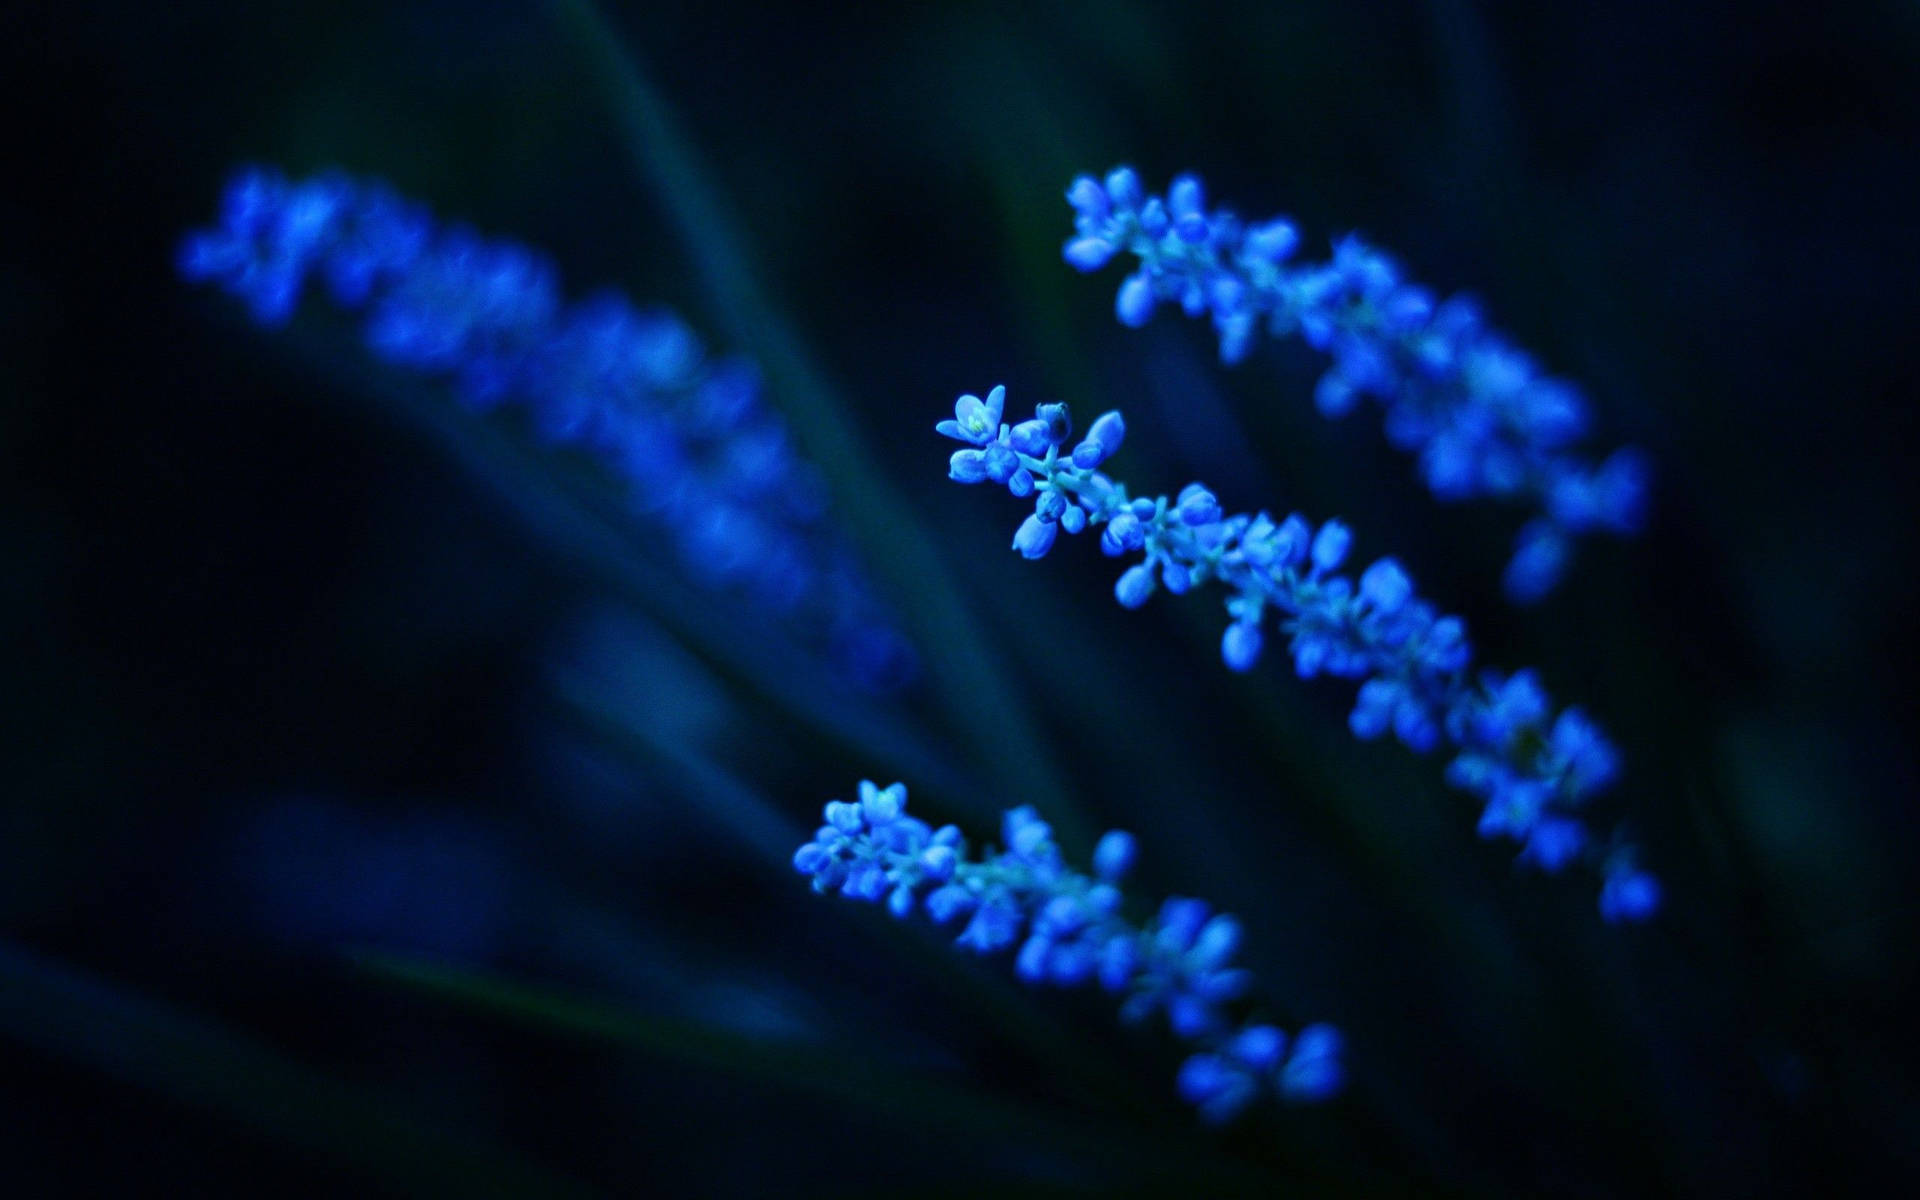 Glowy Plant Dark And Blue Aesthetic Laptop Wallpaper